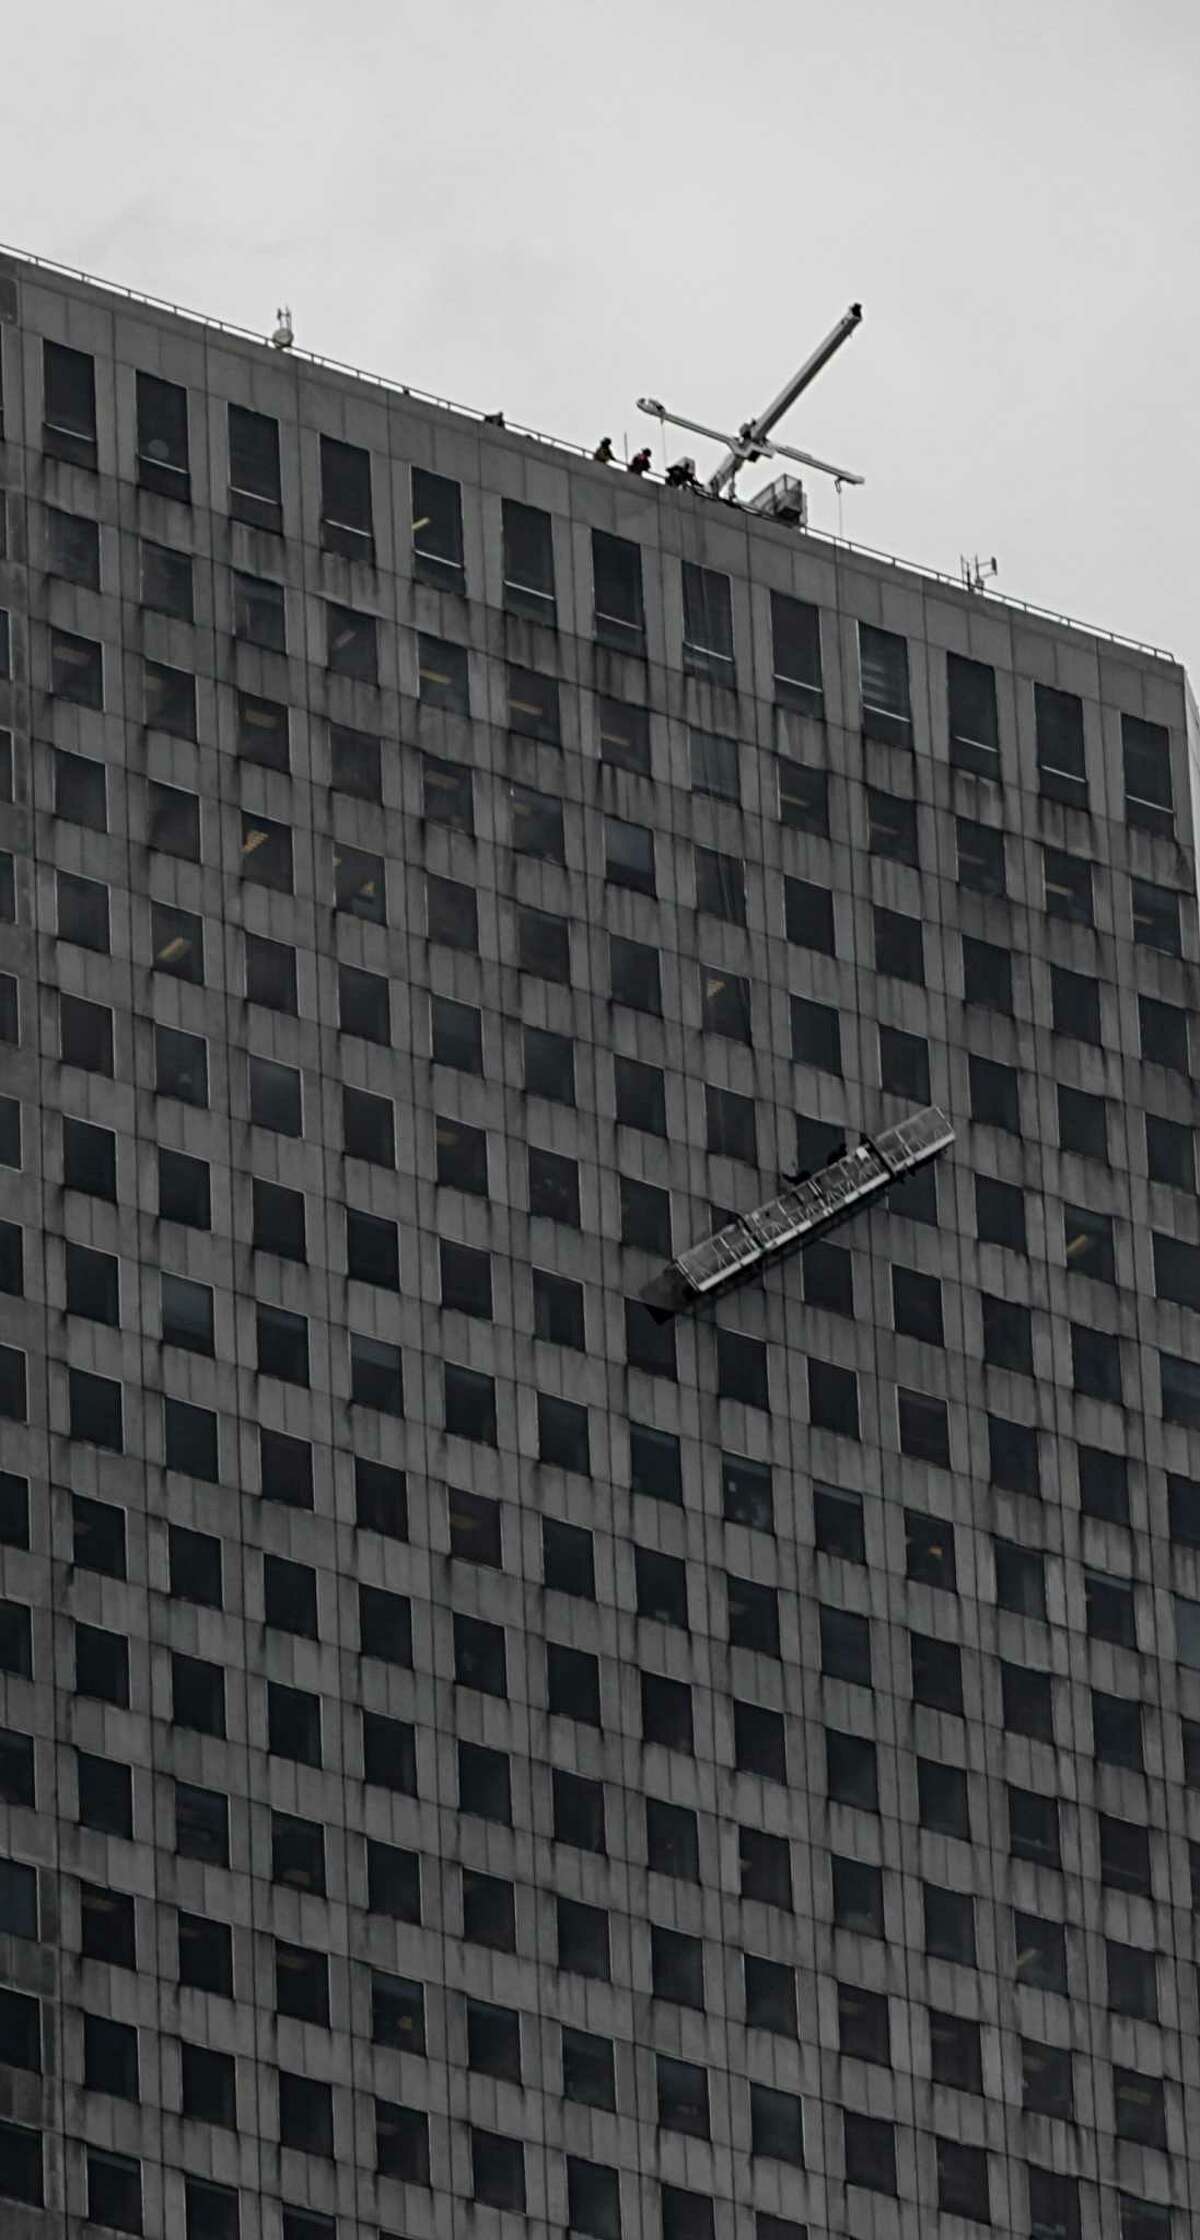 Houston Fire Department firefighters during a high rescue of window washer on the Chase Tower Monday, Jan. 11, 2016, in Houston.